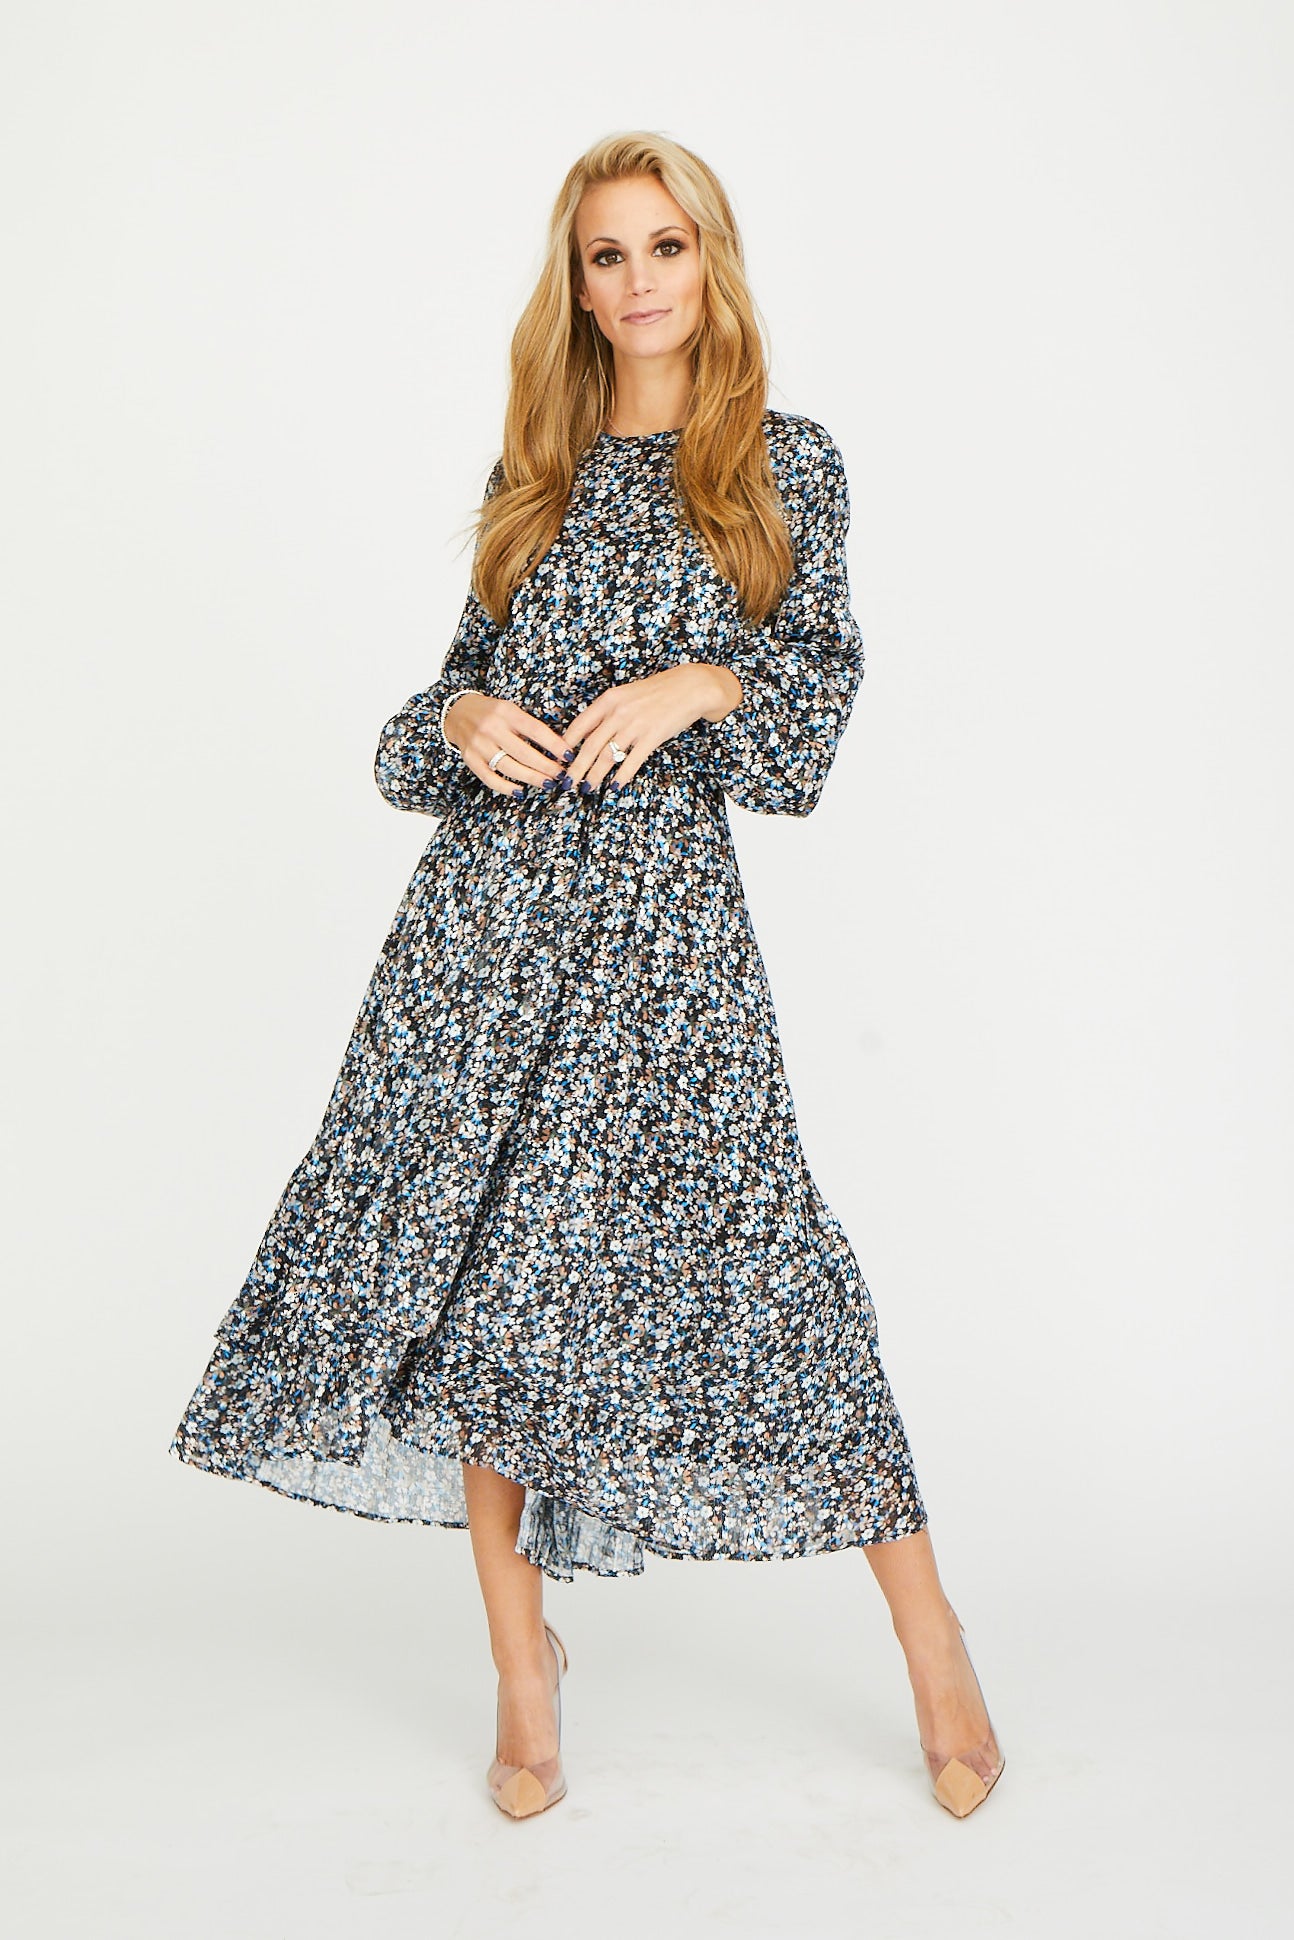 Black with Brown White Blue Floral Print Dress